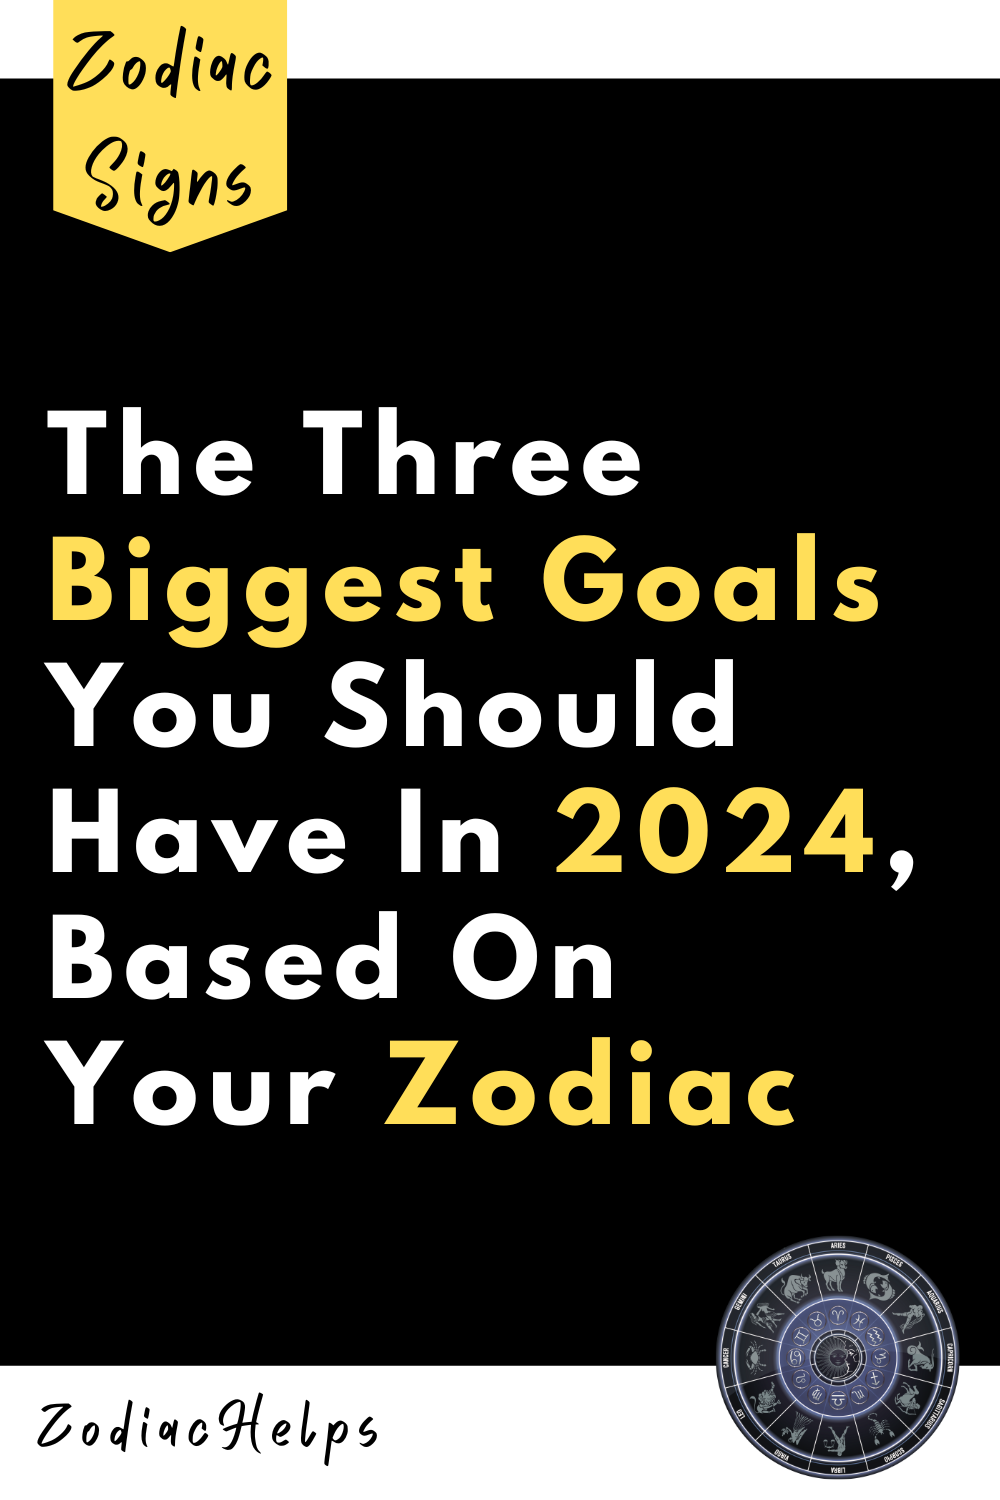 The Three Biggest Goals You Should Have In 2024, Based On Your Zodiac